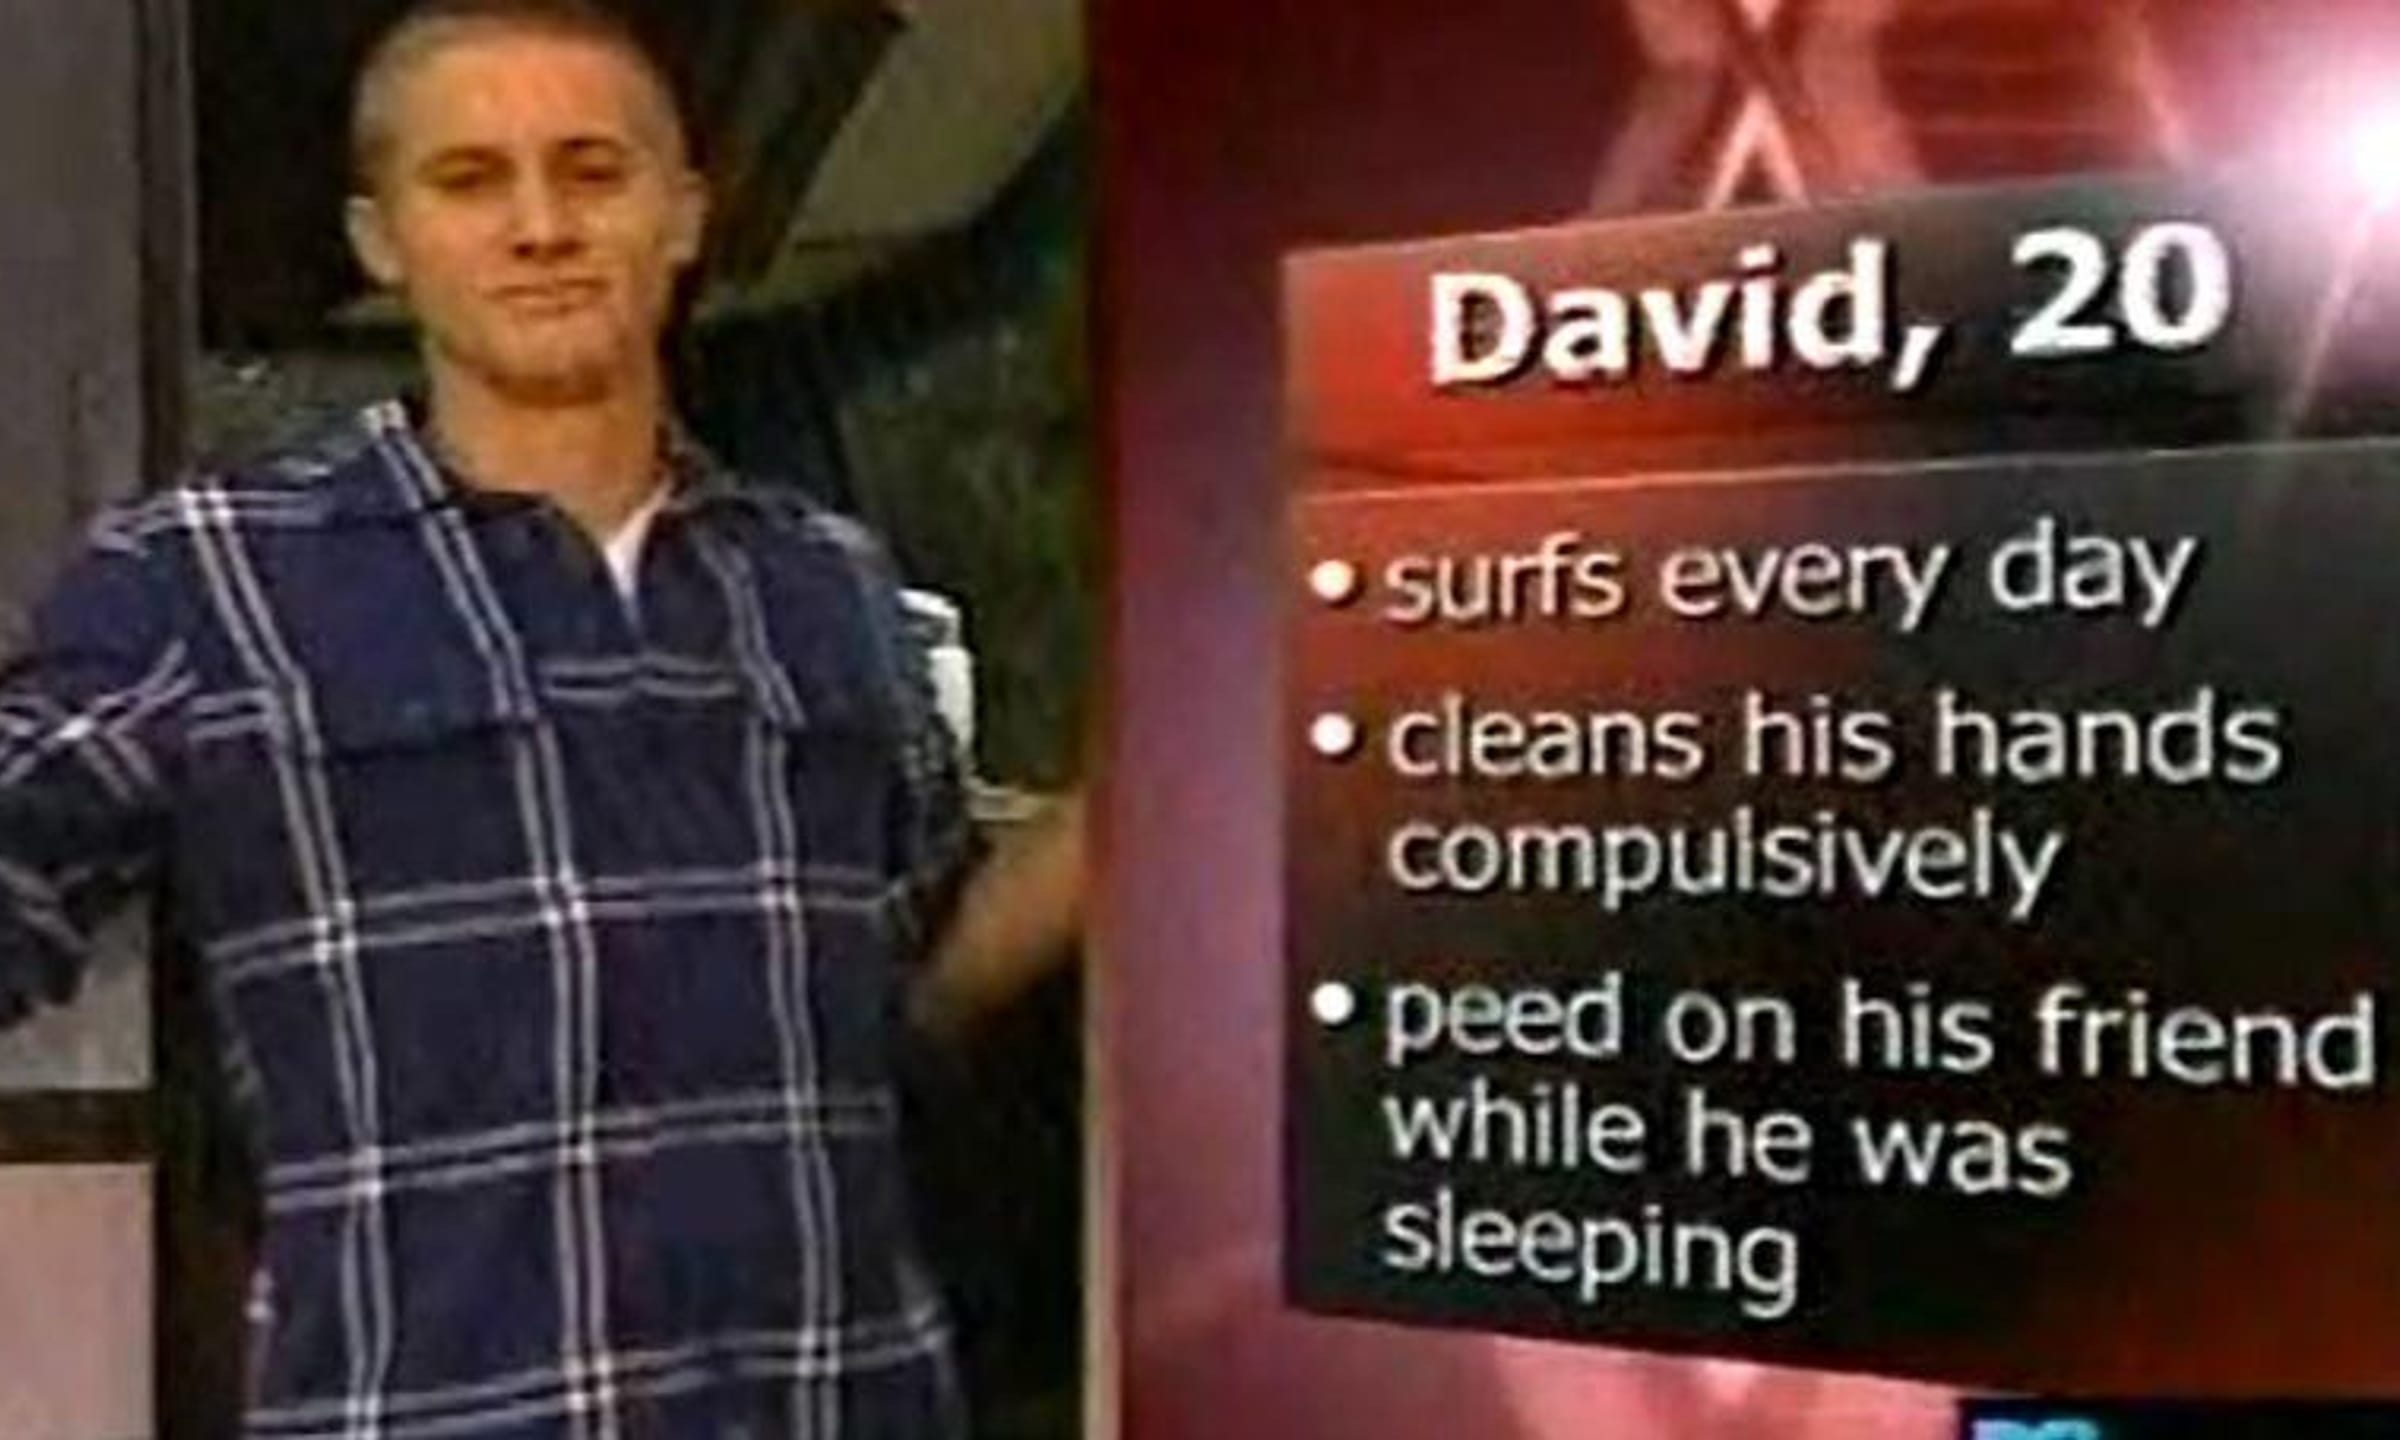 Early '00s MTV Dating Shows That Never Once Ended In True Love